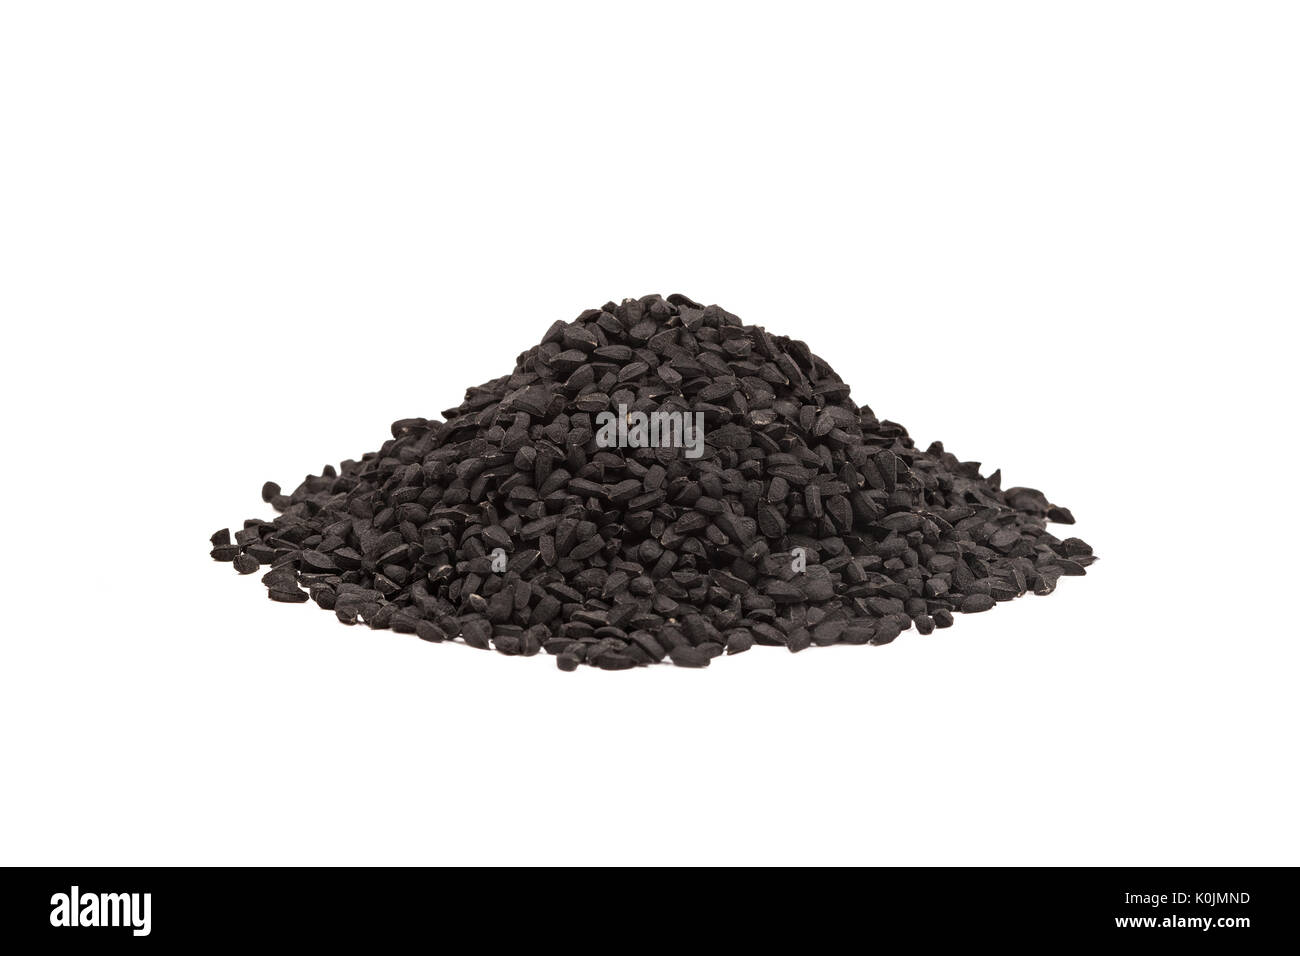 Black cumin seed in wooden scoop isolated on white background, Nigella sativa. Stock Photo